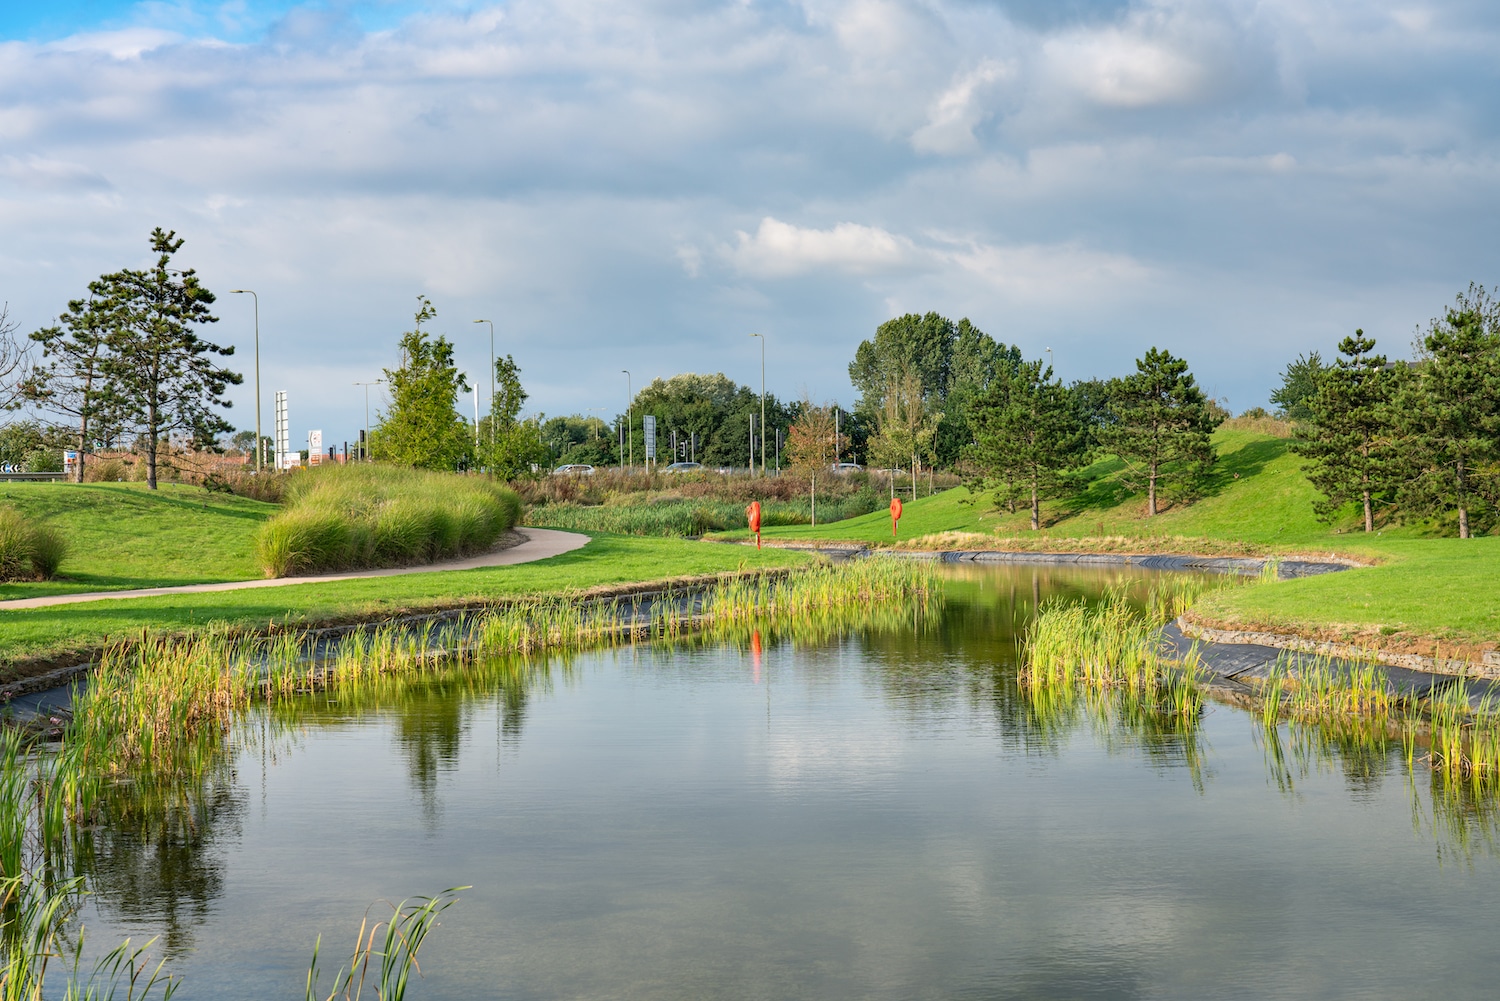 Is Bicester a nice place to live? Image shows a water pond in Bicester town, England.